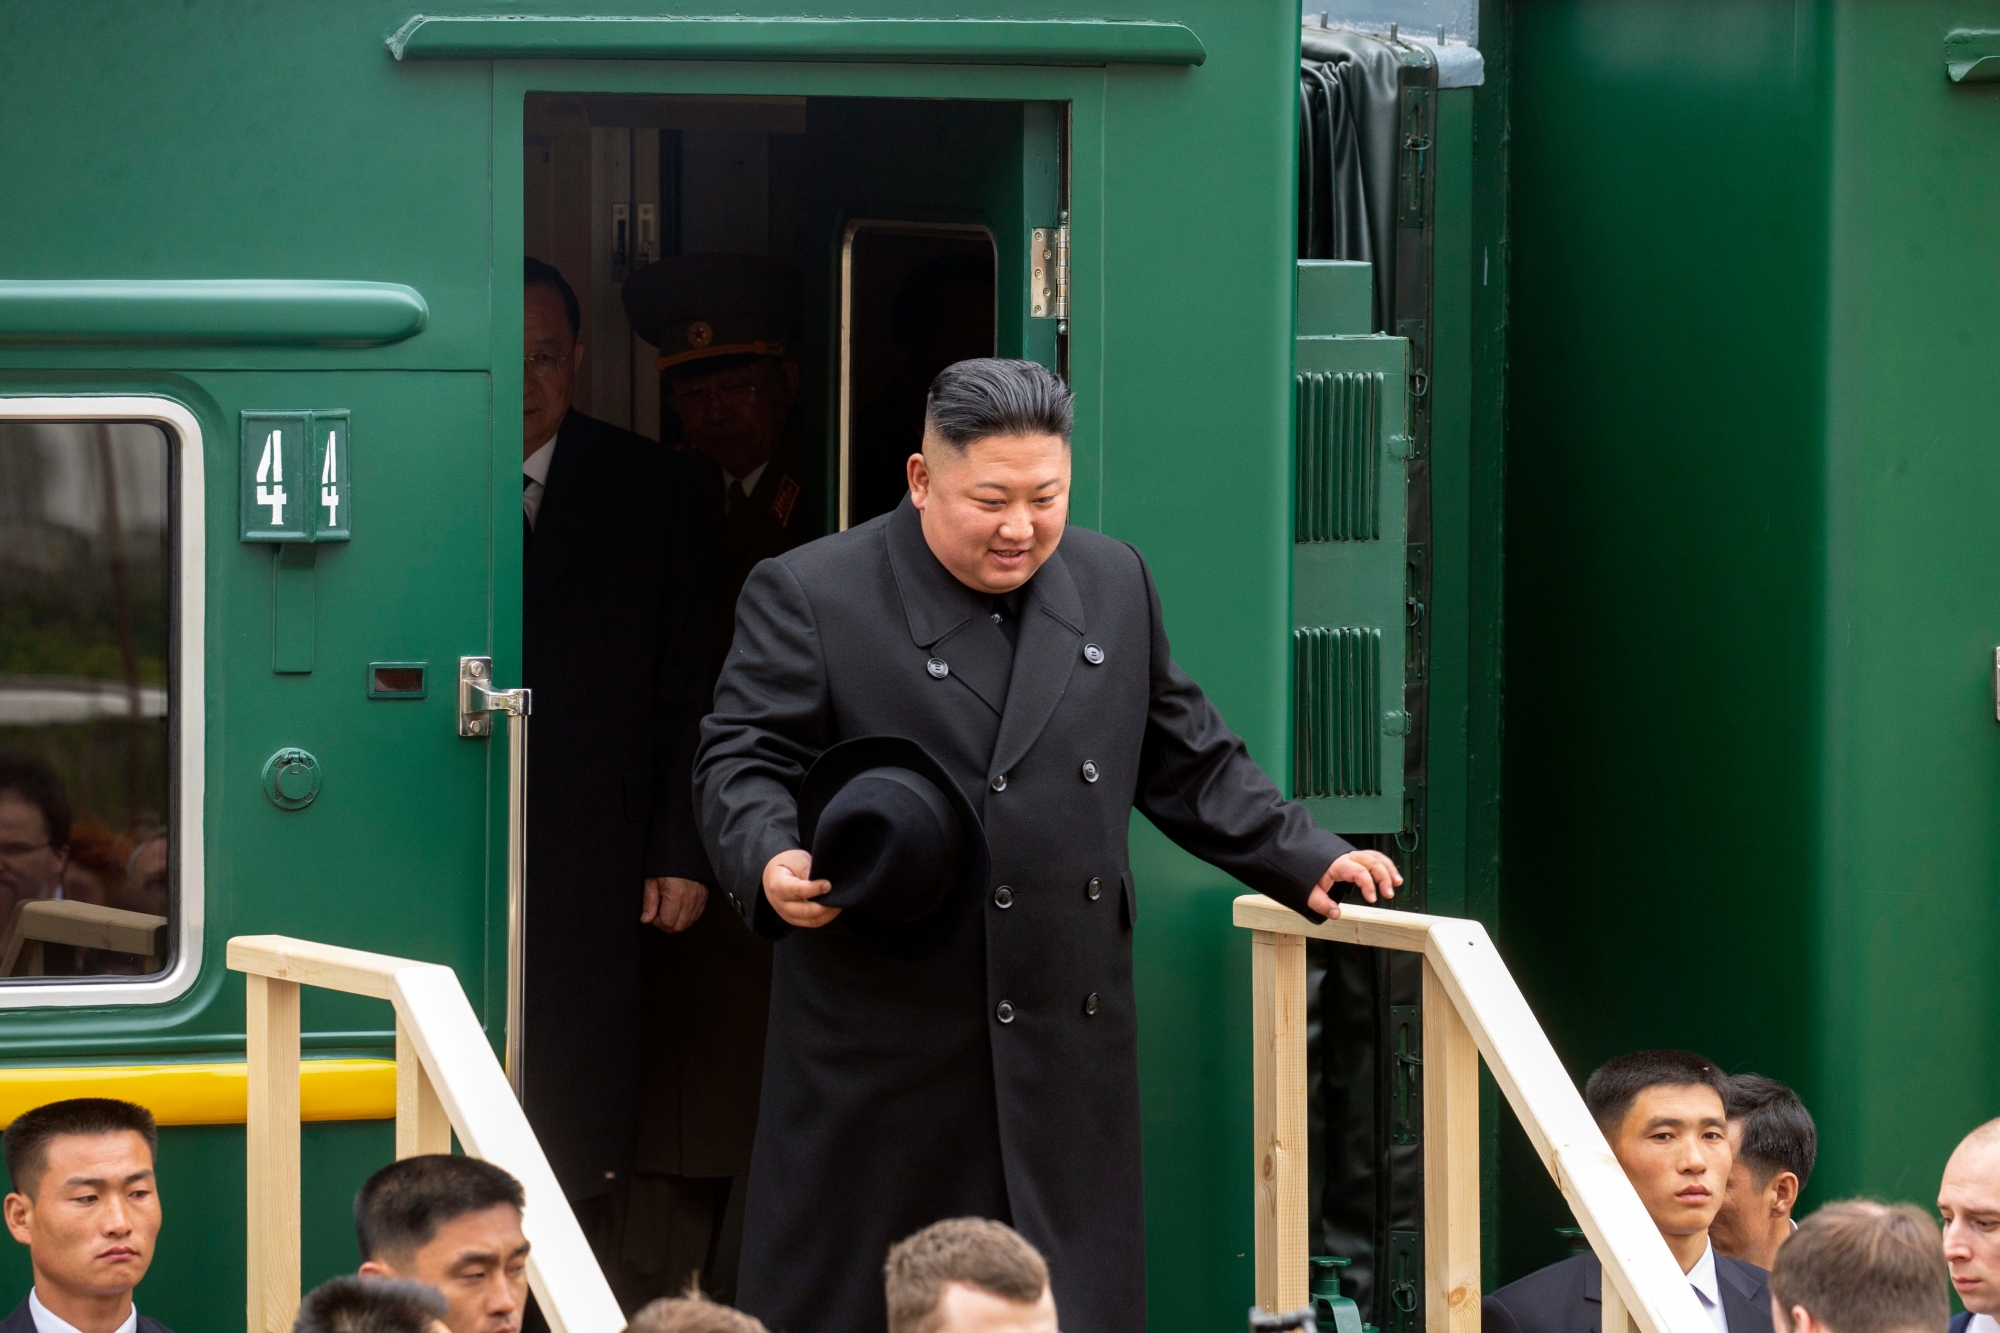 In this photo released by press office of the administration of Primorsky Krai region, North Korea's leader Kim Jong Un leaves a train carriage after arriving at the border station of Khasan, Primorsky Krai region, Russia, Wednesday, April 24, 2019. North Korean leader Kim Jong Un arrived in Russia on Wednesday morning for his much-anticipated summit with Russian President Vladimir Putin in the Pacific port city of Vladivostok. (Alexander Safronov/Press Office of the Primorye Territory Administration via AP) Putin Kim Summit